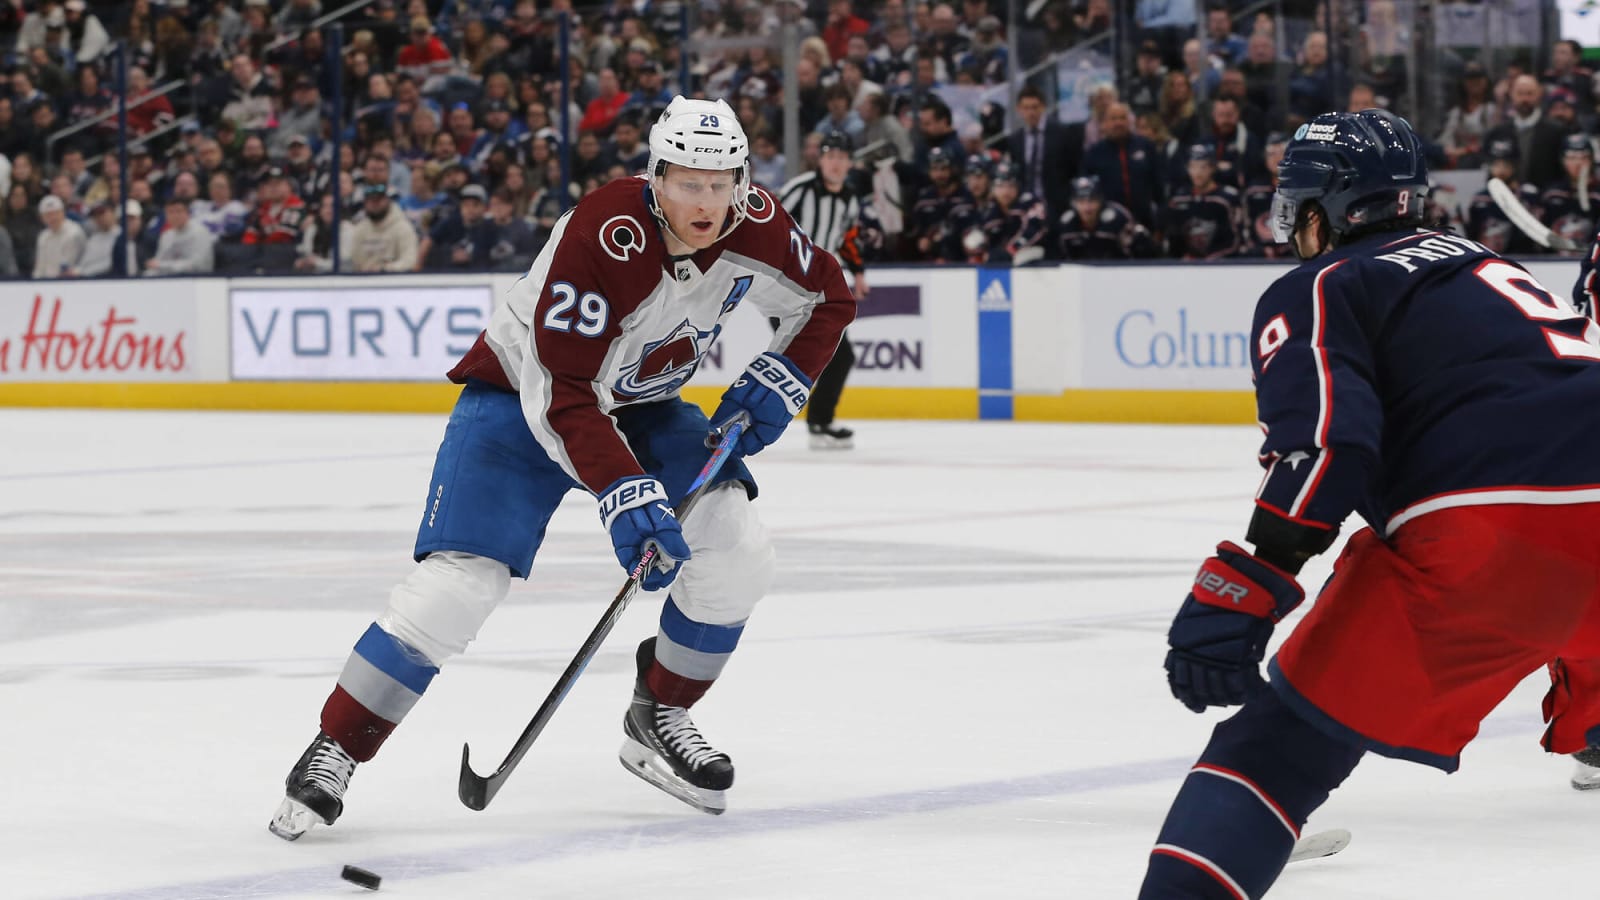 Teammate Discusses MacKinnon’s Drive; Calls Him ‘Best In The World’